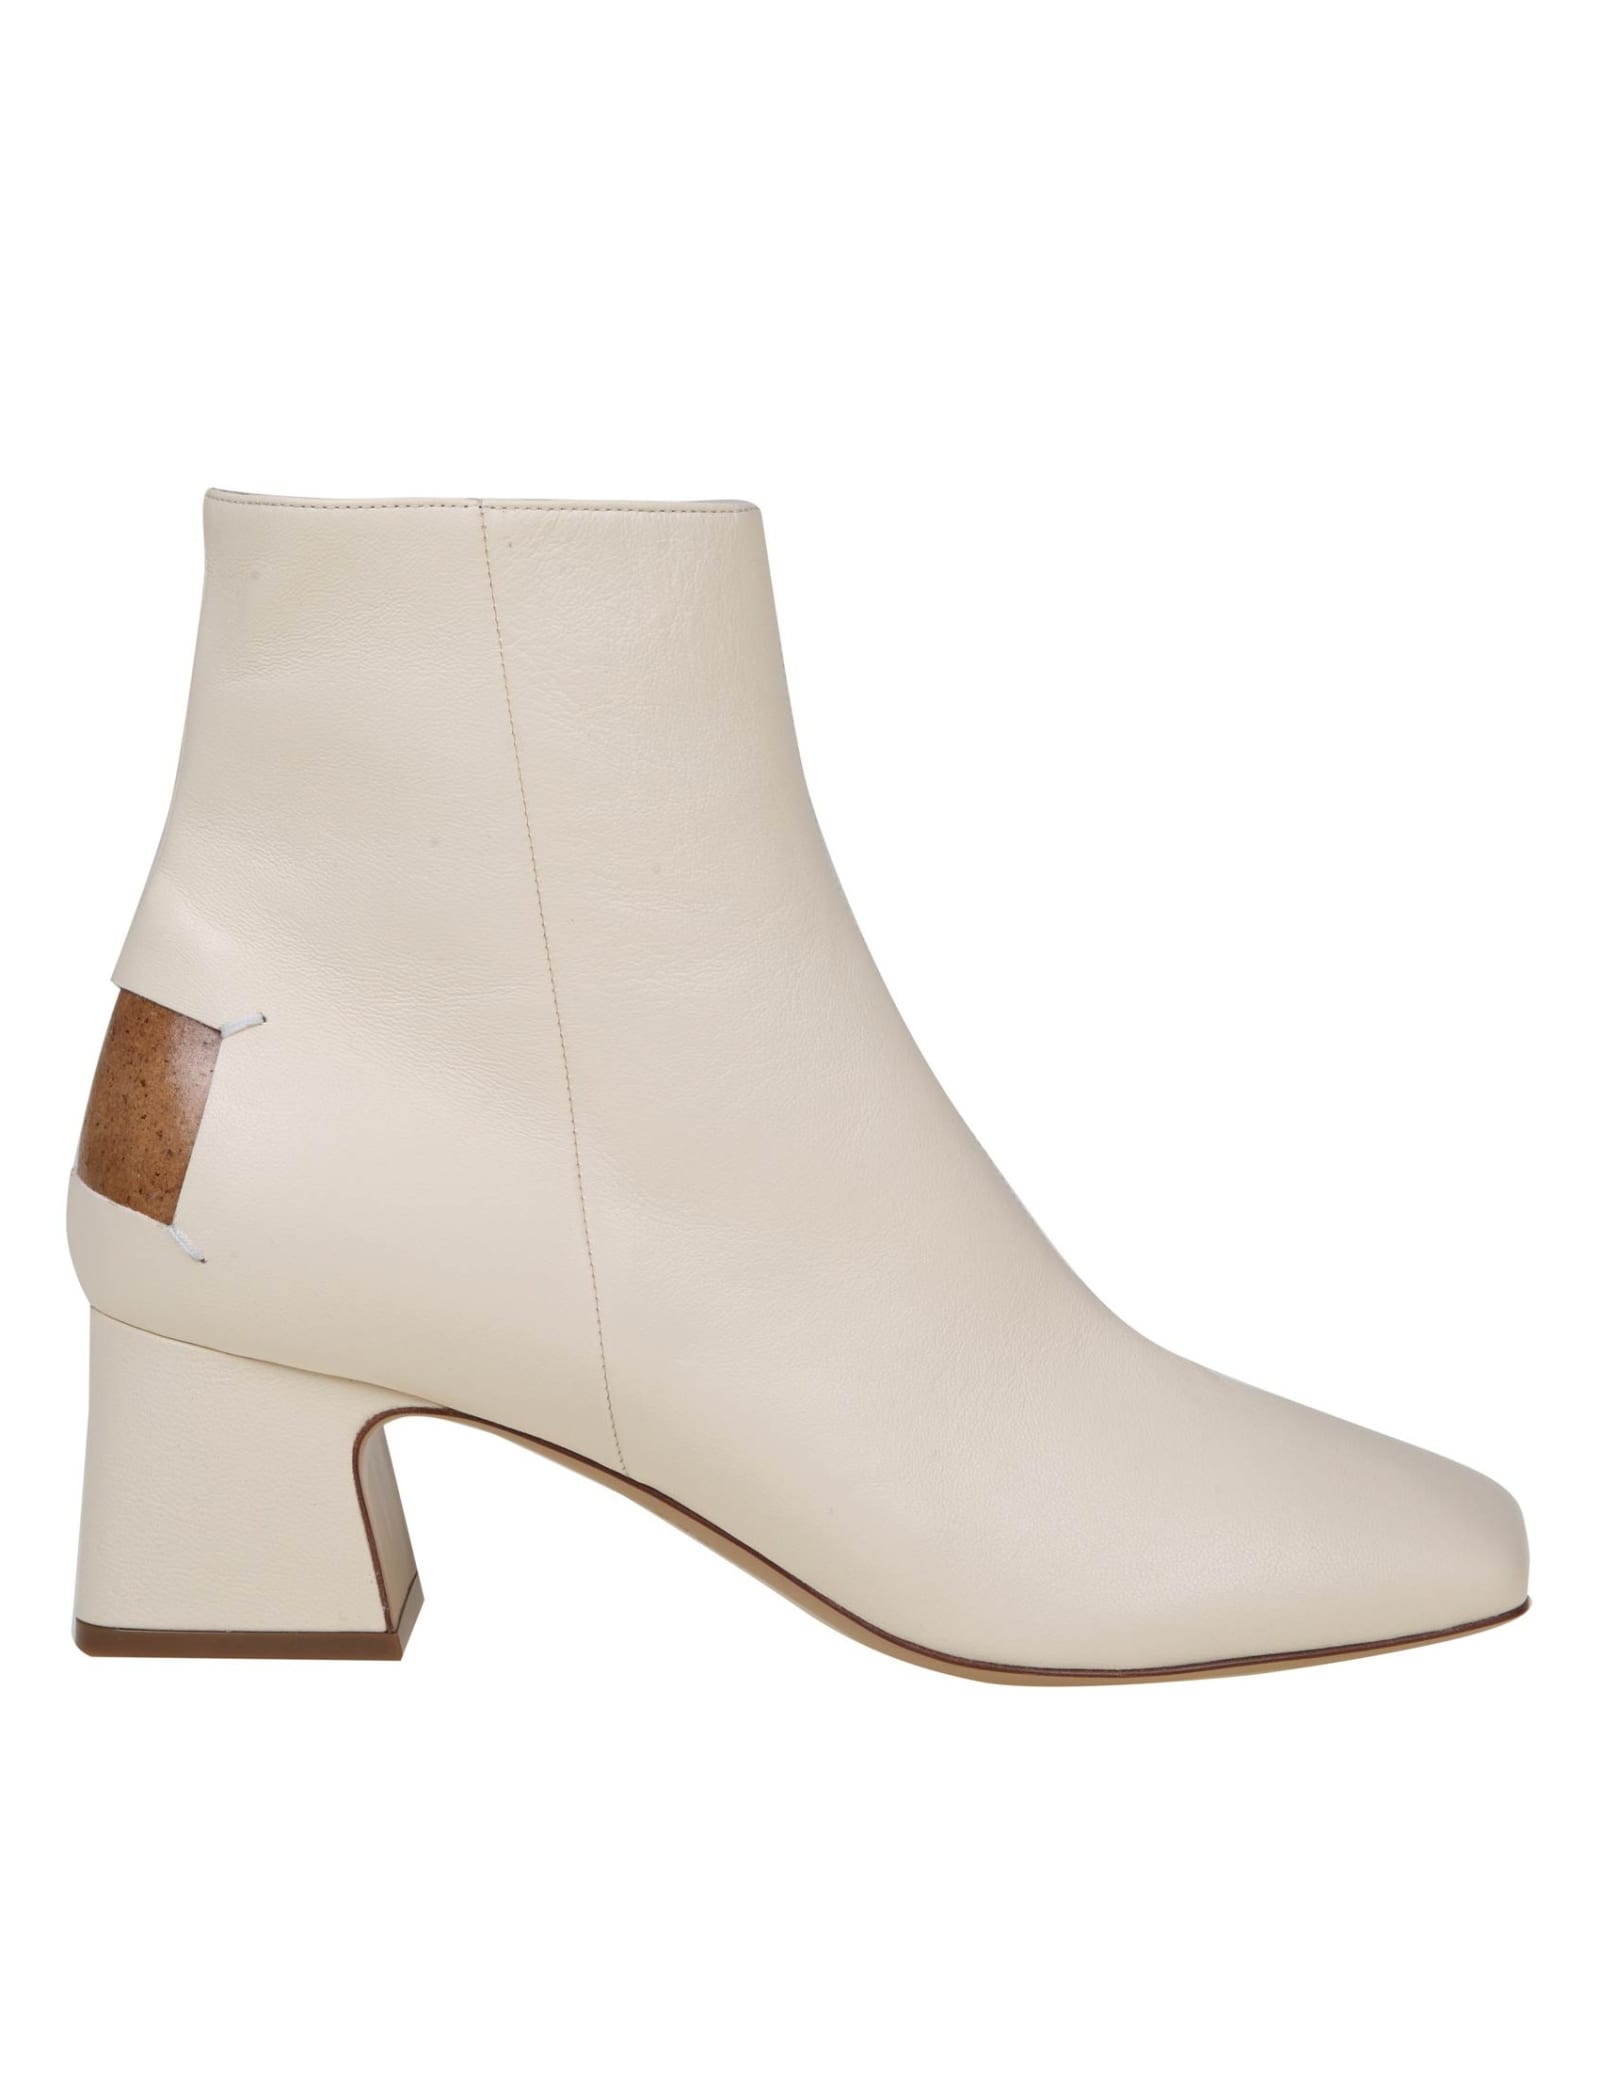 MAISON MARGIELA ANKLE BOOT FOUR STITCHES IN CREAM COLOR LEATHER